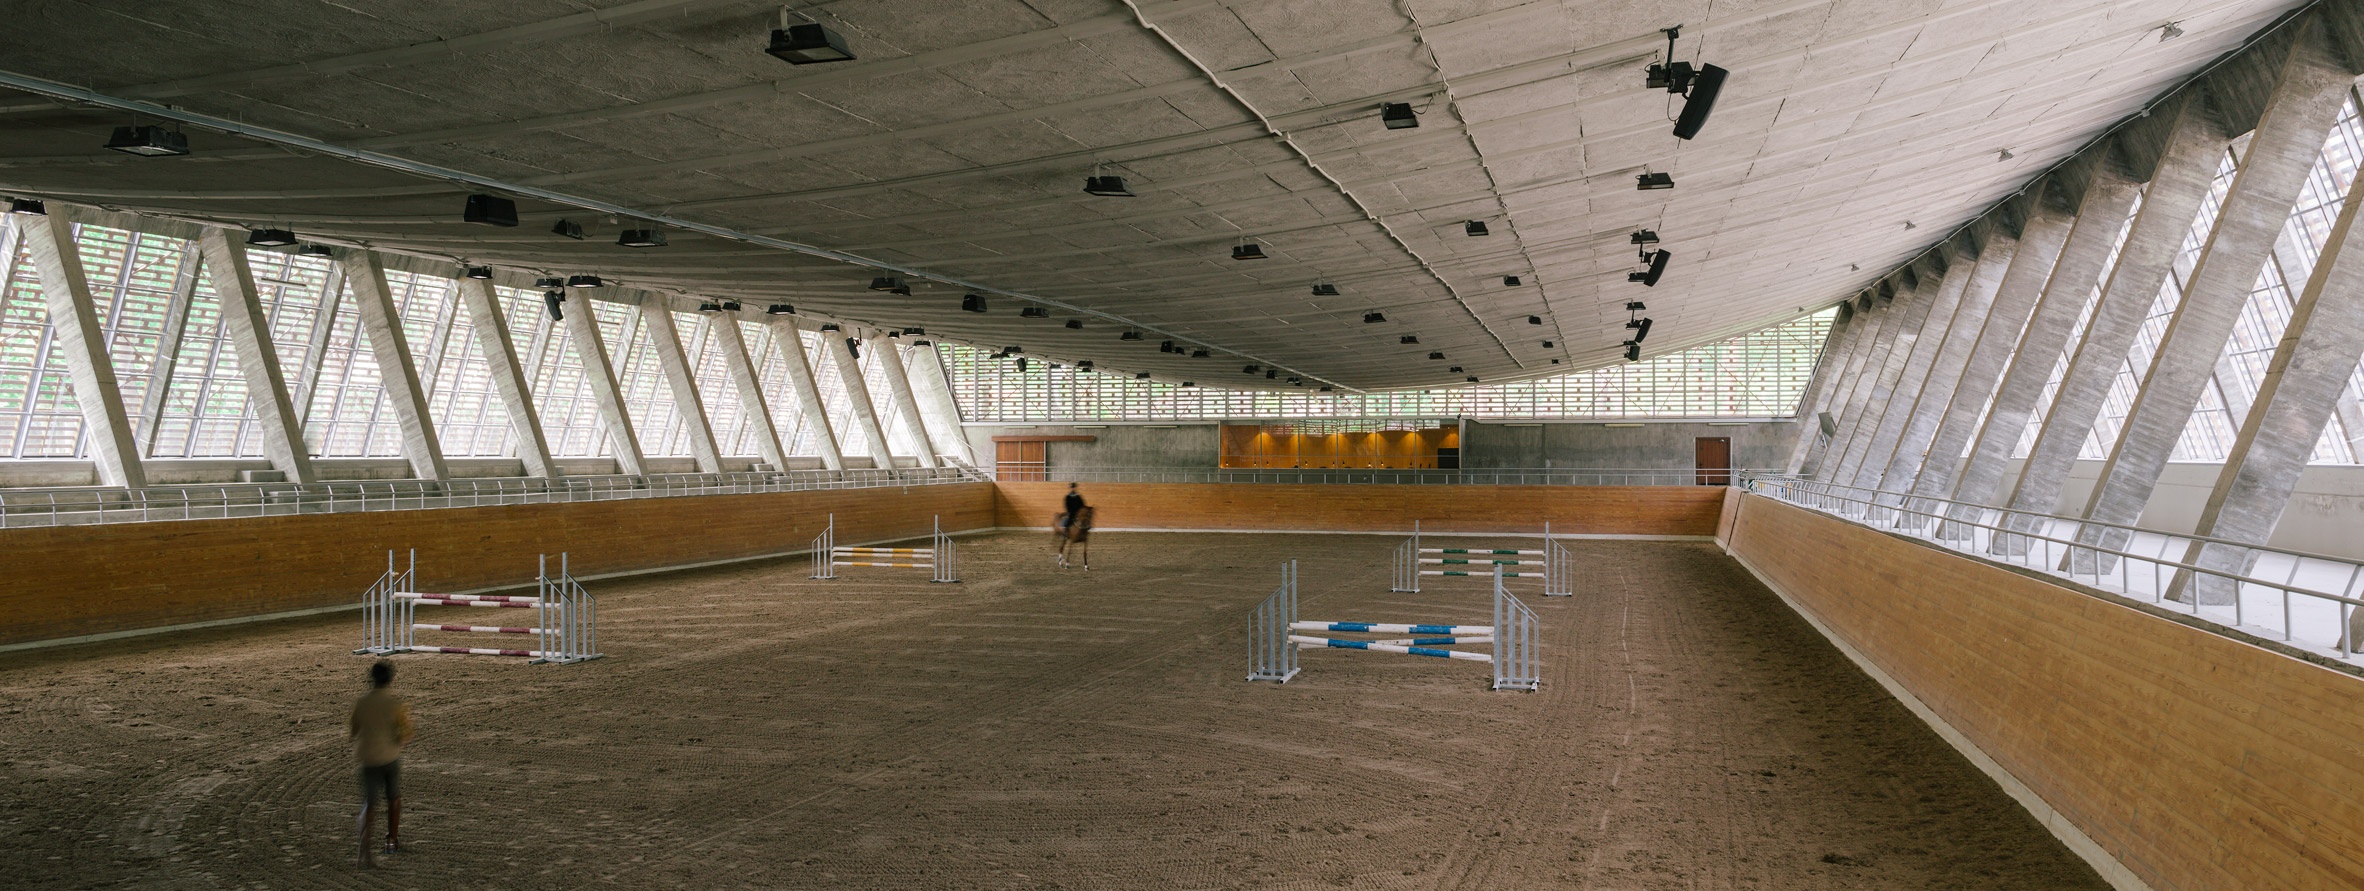 Riding arena by Beta 0 Architects